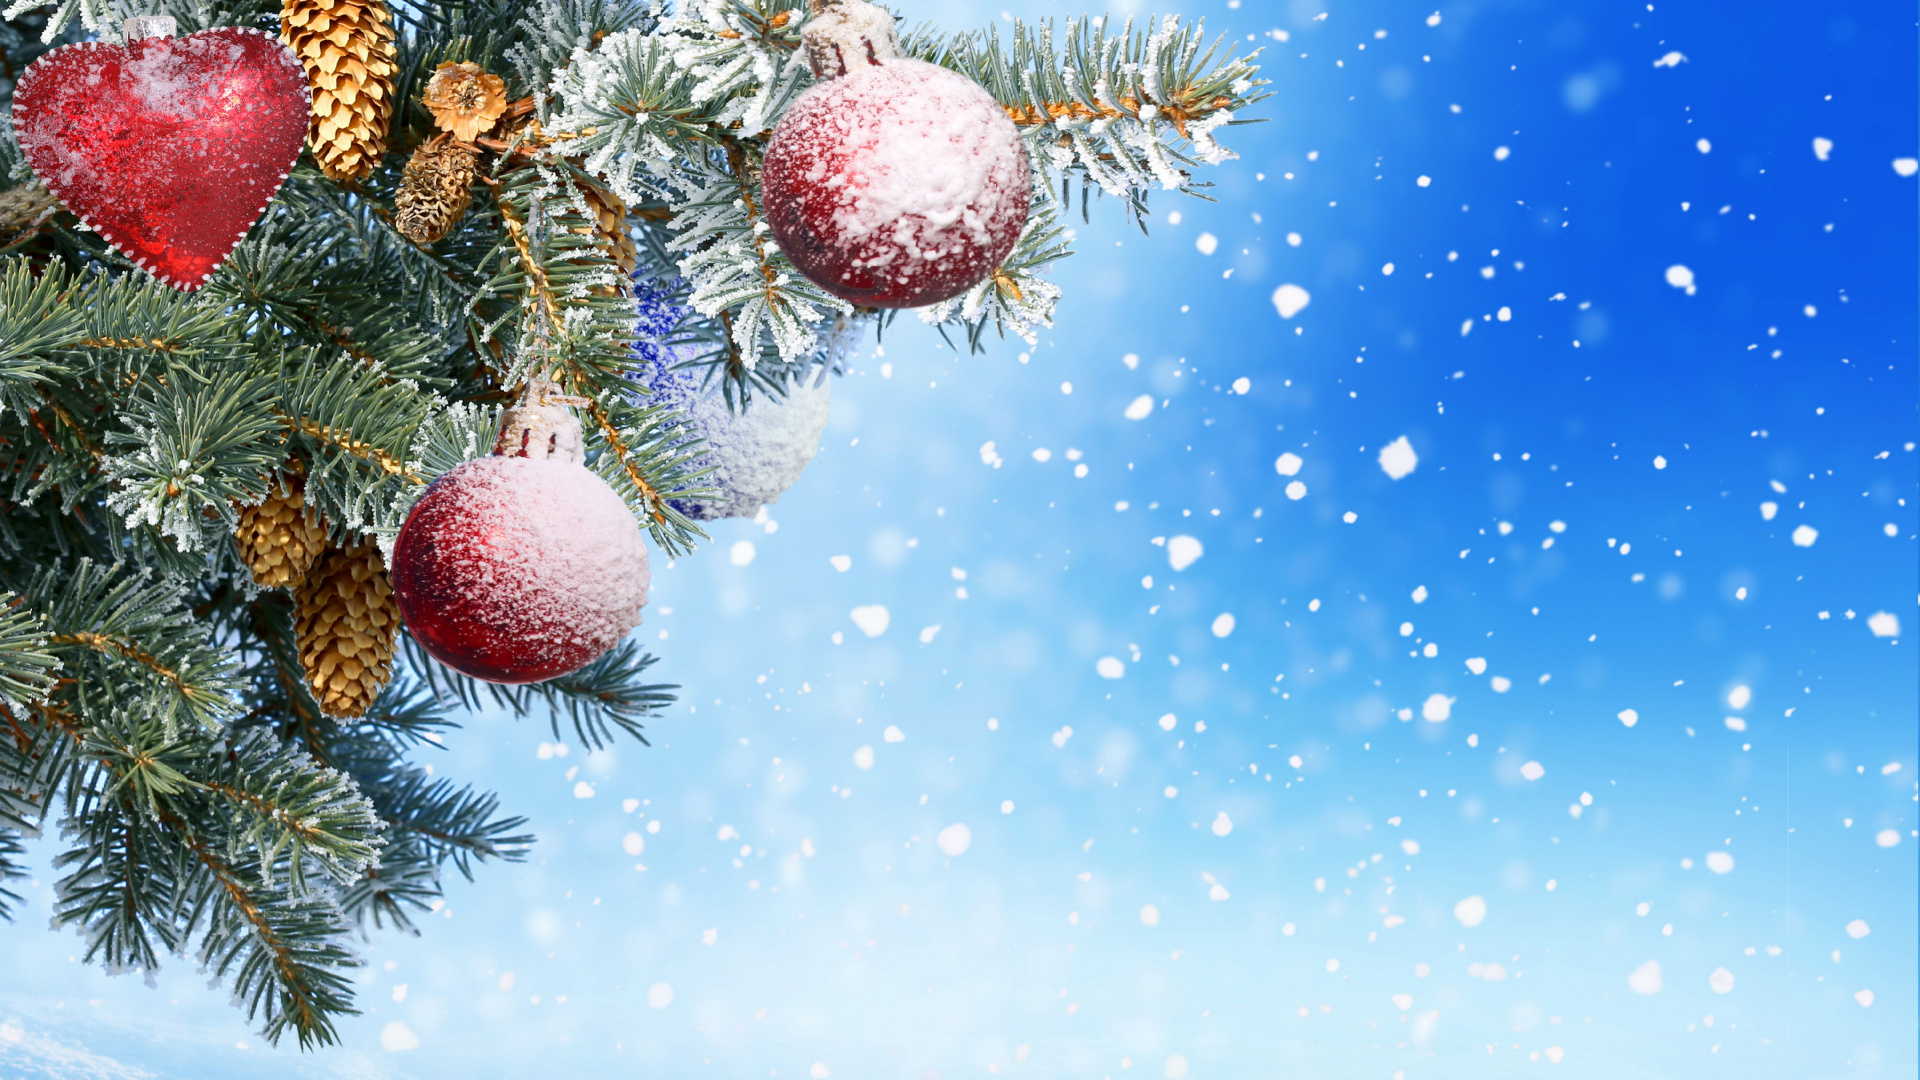 New Year, Christmas Day, Christmas Ornament, Tree, Fir. Wallpaper in 1920x1080 Resolution